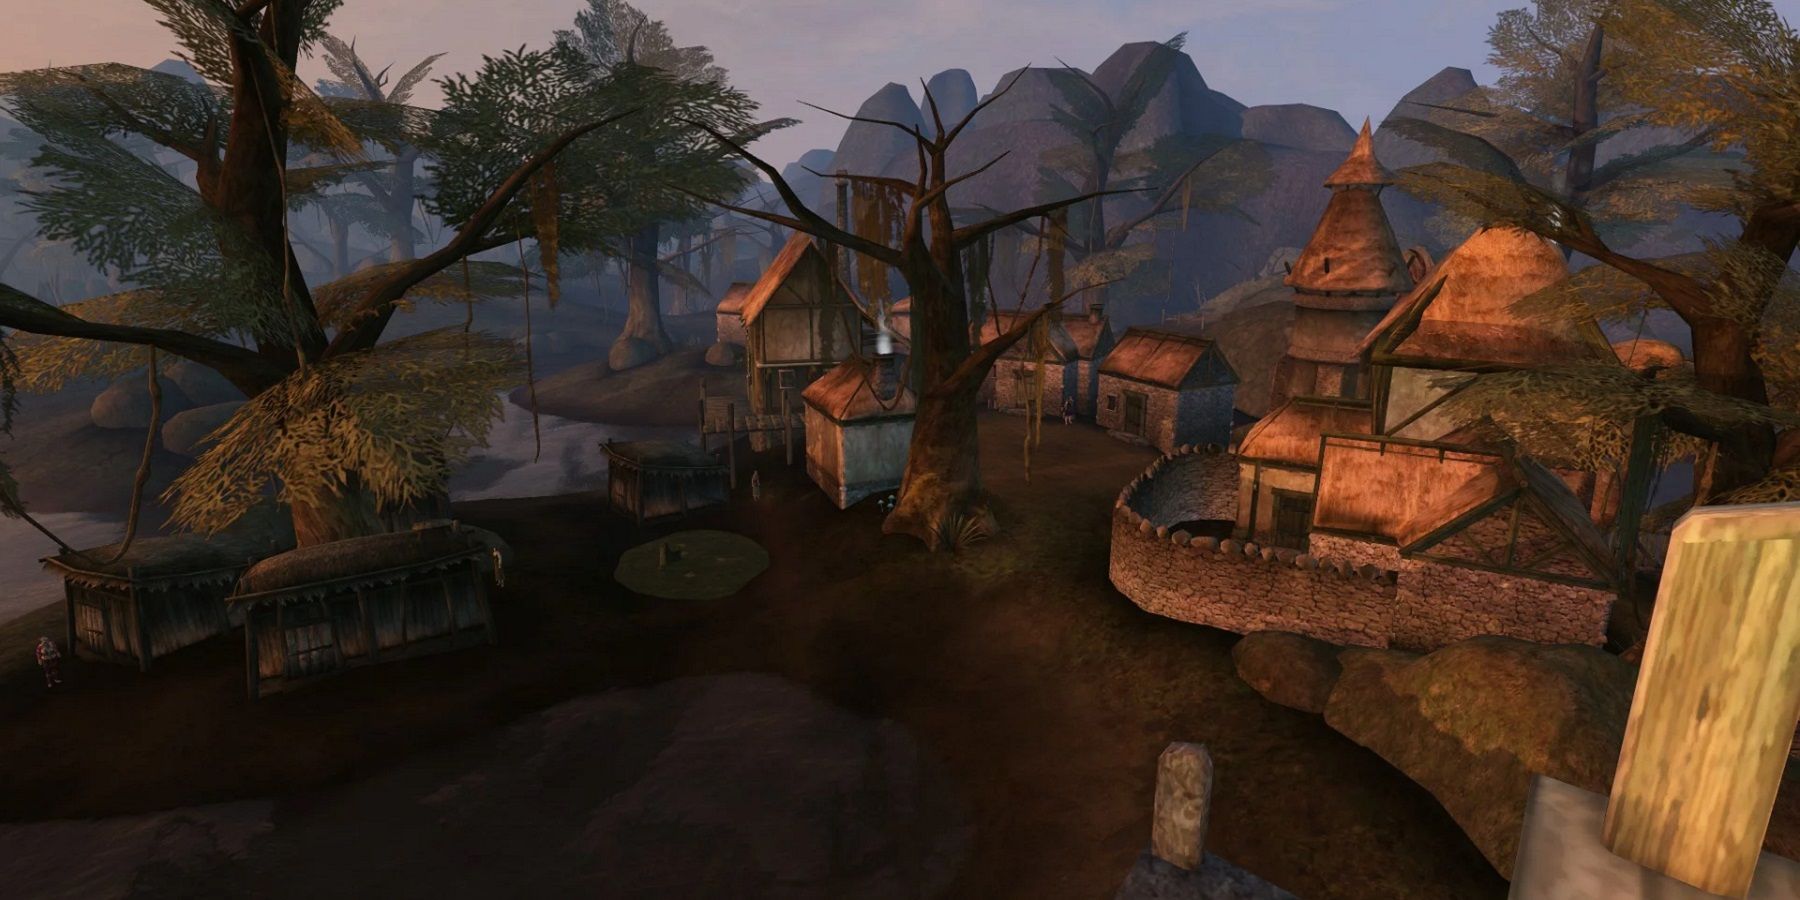 Screenshot from The Elder Scrolls 3: Morrowind showing a wide angle view of Seyda Neen.